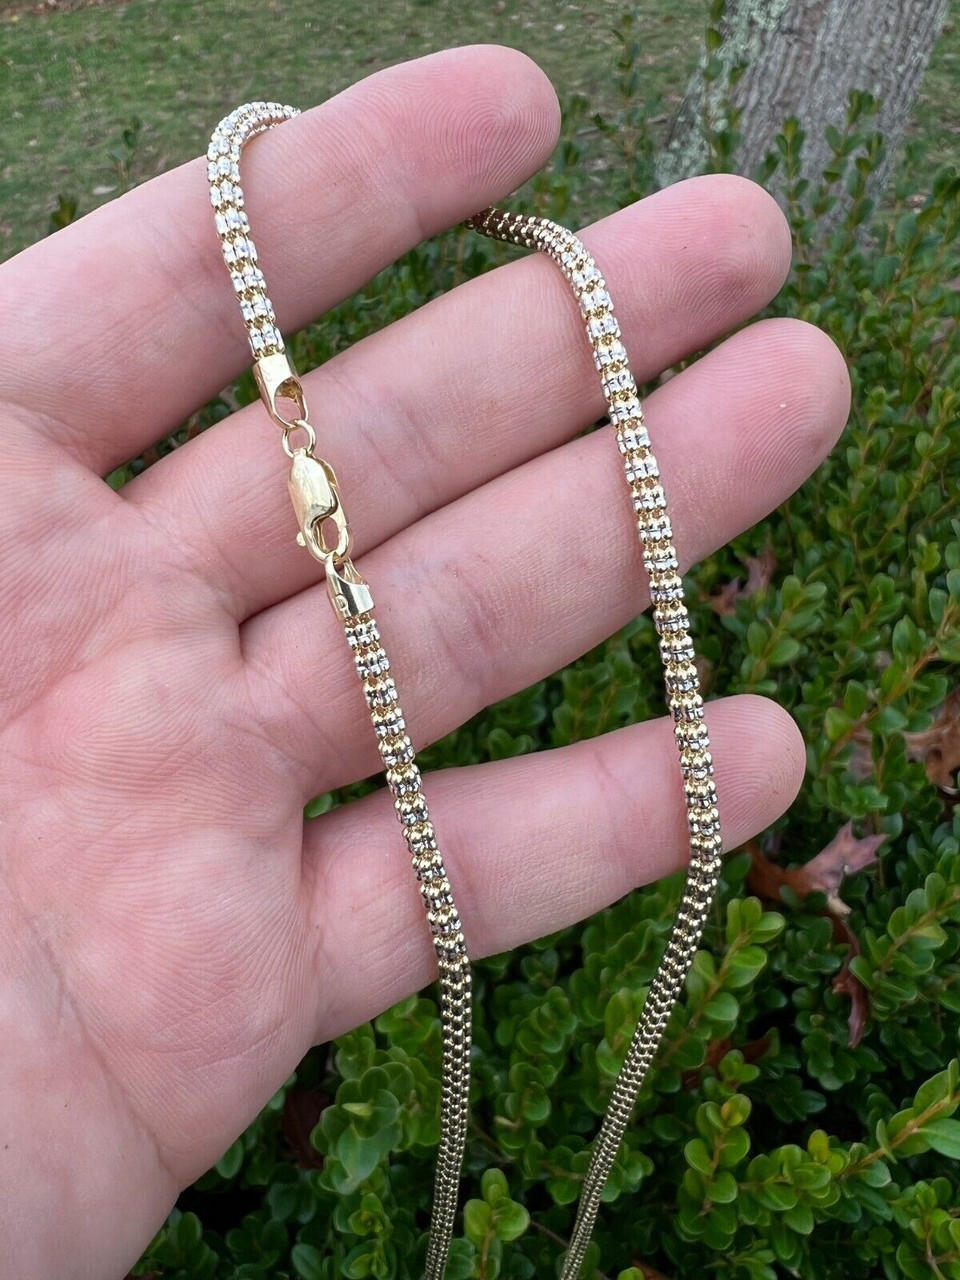 https://cdn11.bigcommerce.com/s-s8inshvd4z/images/stencil/original/products/5789/76819/harlembling-14k-real-solid-yellow-gold-sparkle-ice-link-chain-necklace-iced-rope-3mm__68591.1670601176.jpg?c=2